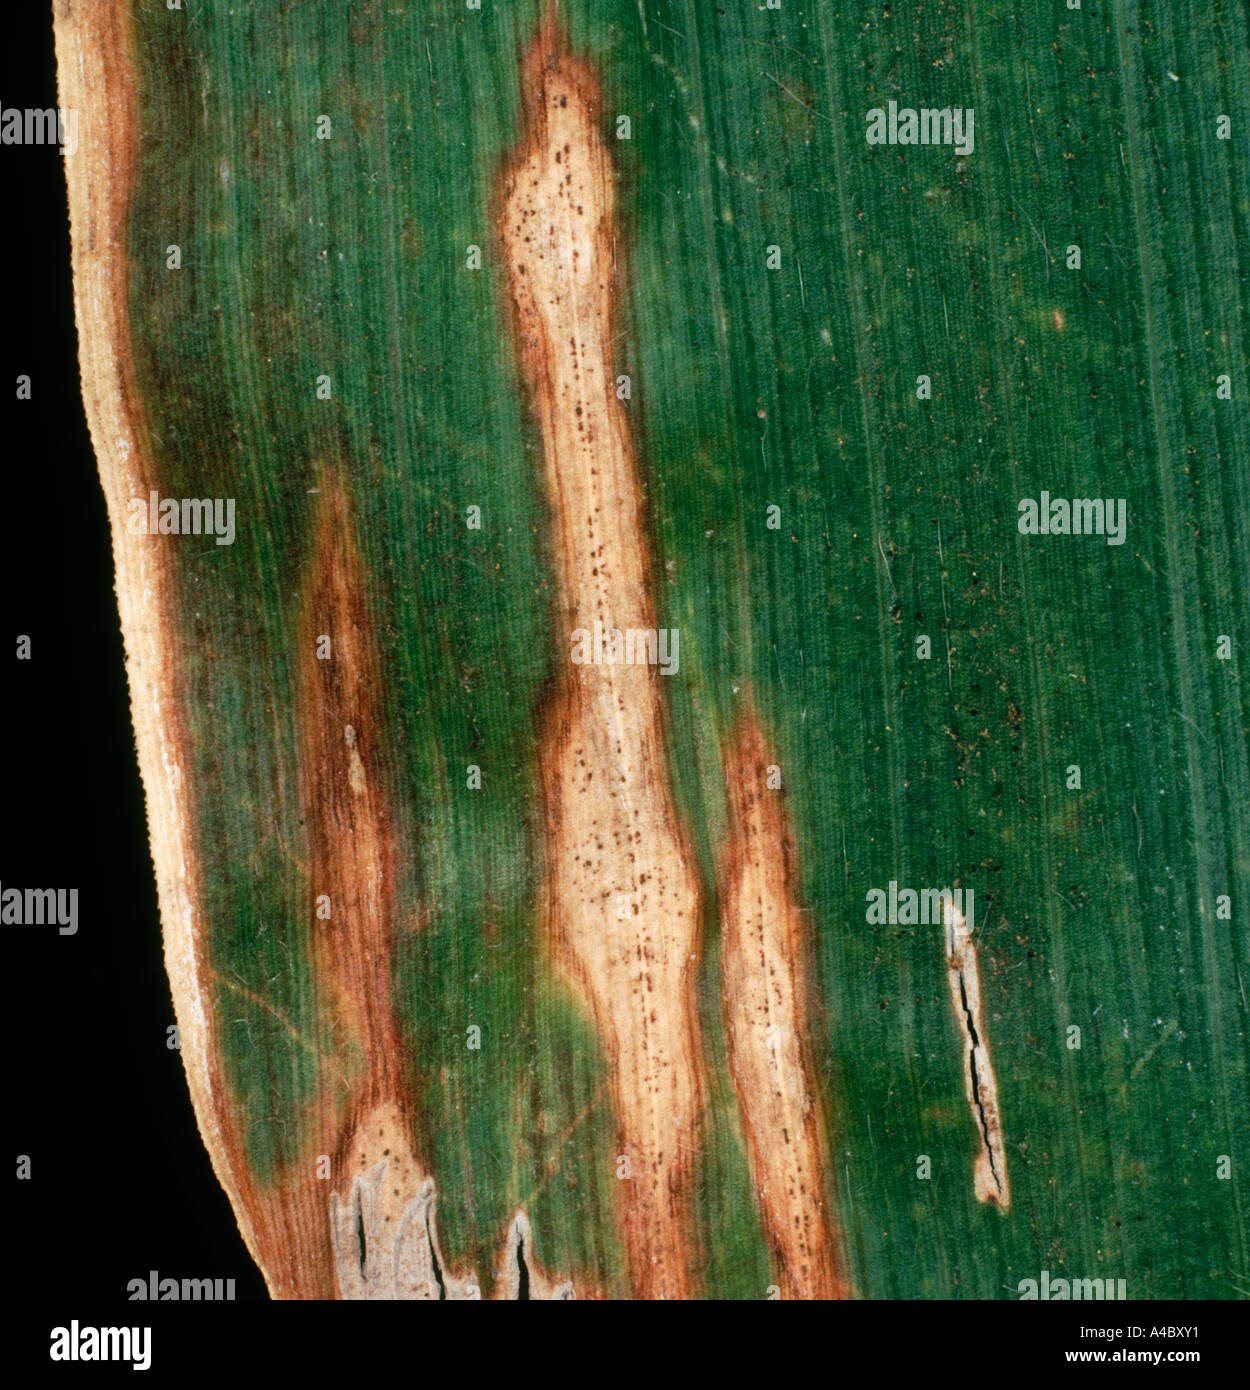 Anthacnose Colletotrichum graminicola lesions with pycnidia on a maize or corn leaf Stock Photo